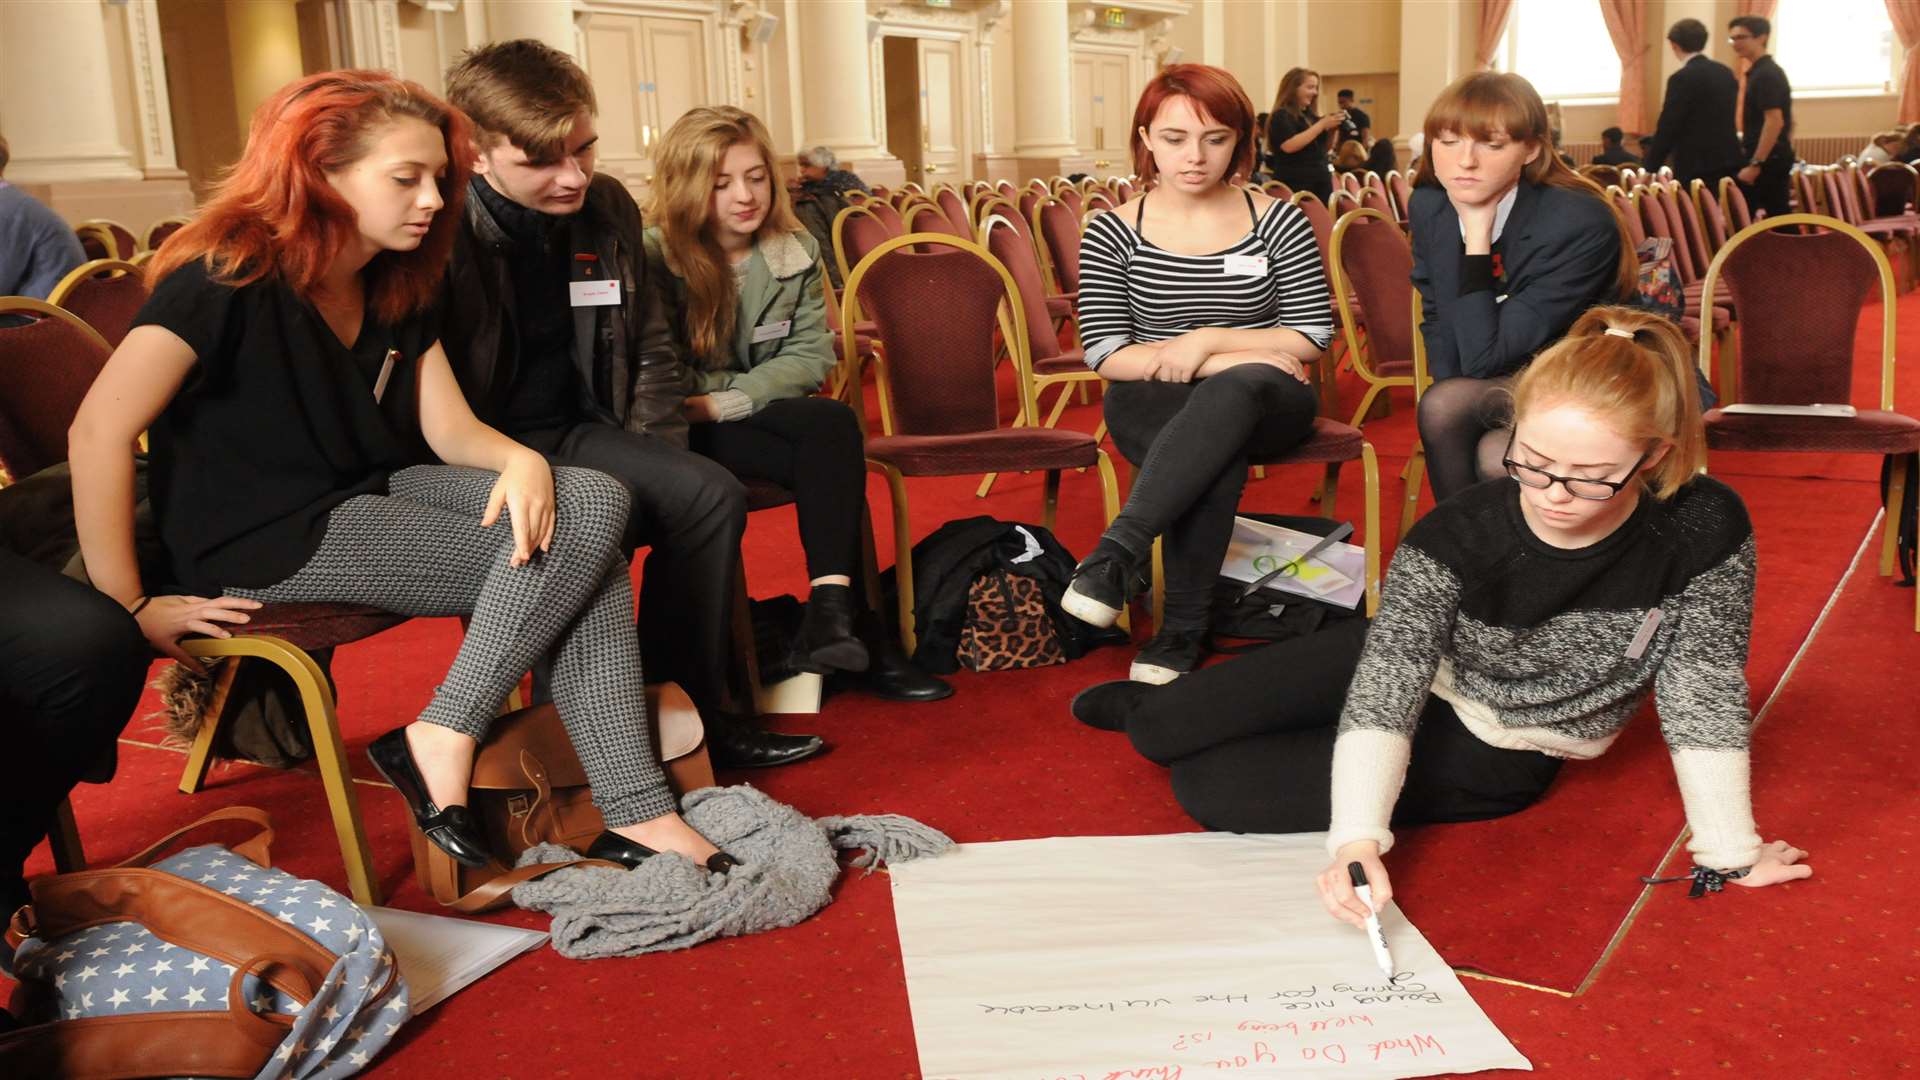 Emily Guest leads the discussion on community well-being. Picture: Steve Crispe.